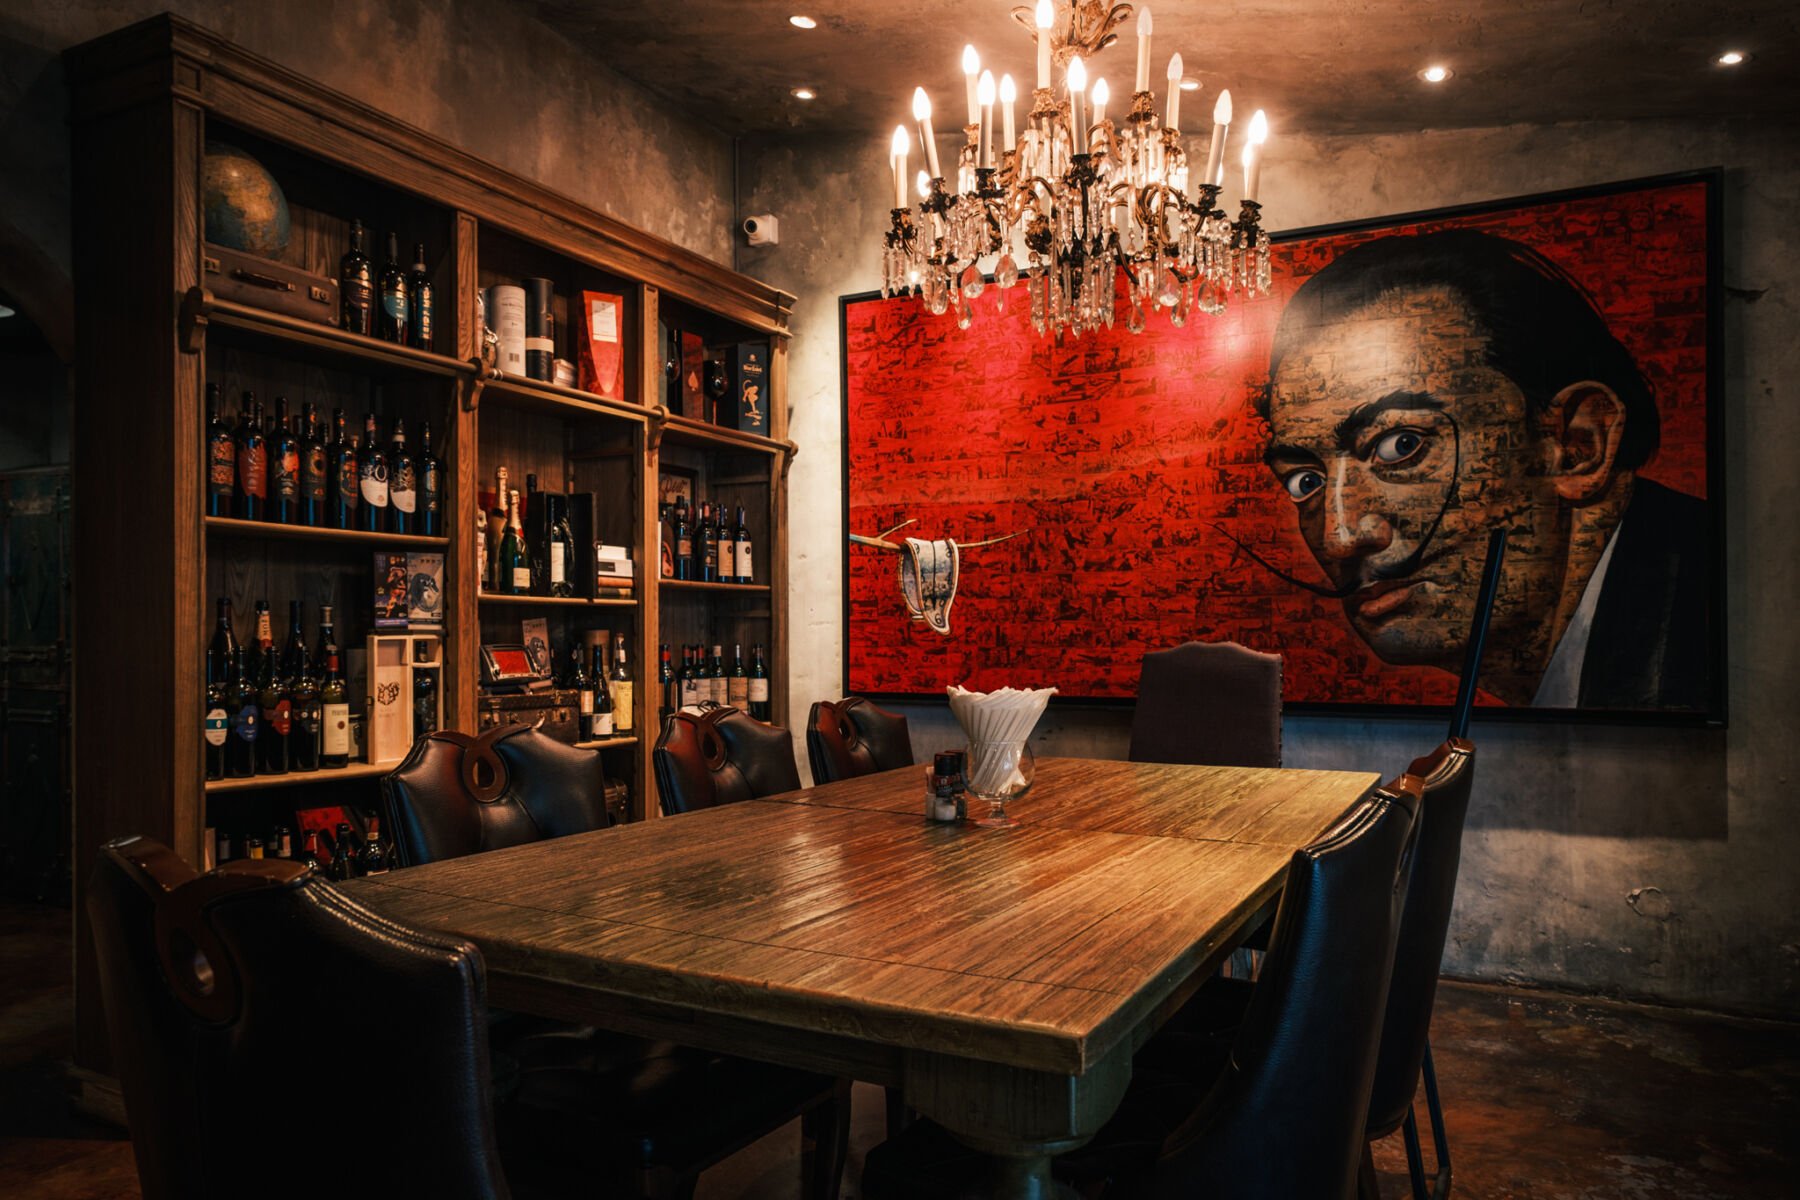 Salvador Dali's face painted on the wall of The Melting Clock, an Italian restaurant and wine lounge in Ekkamai, Bangkok